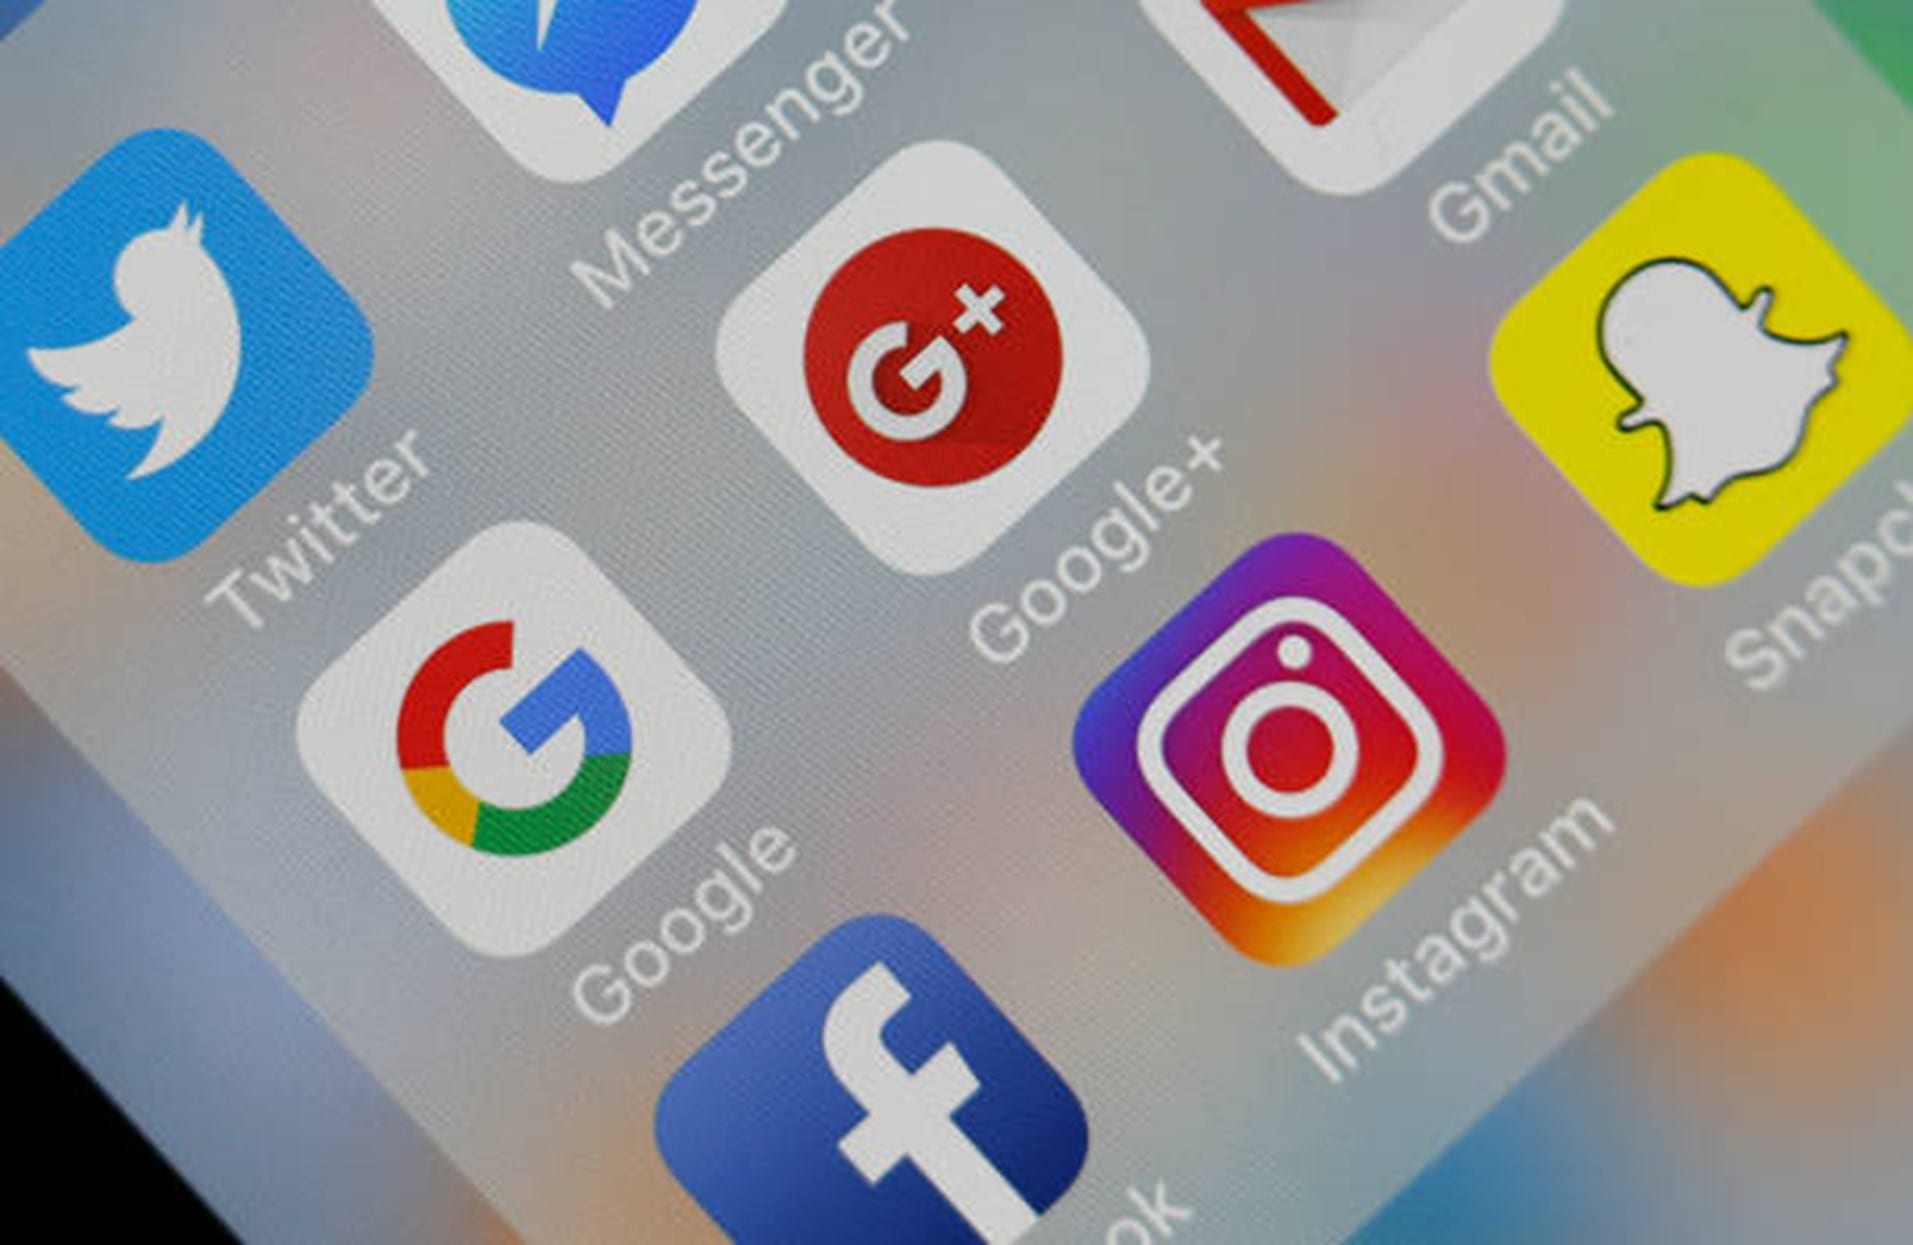 You can stop social media networks exploiting your privacy